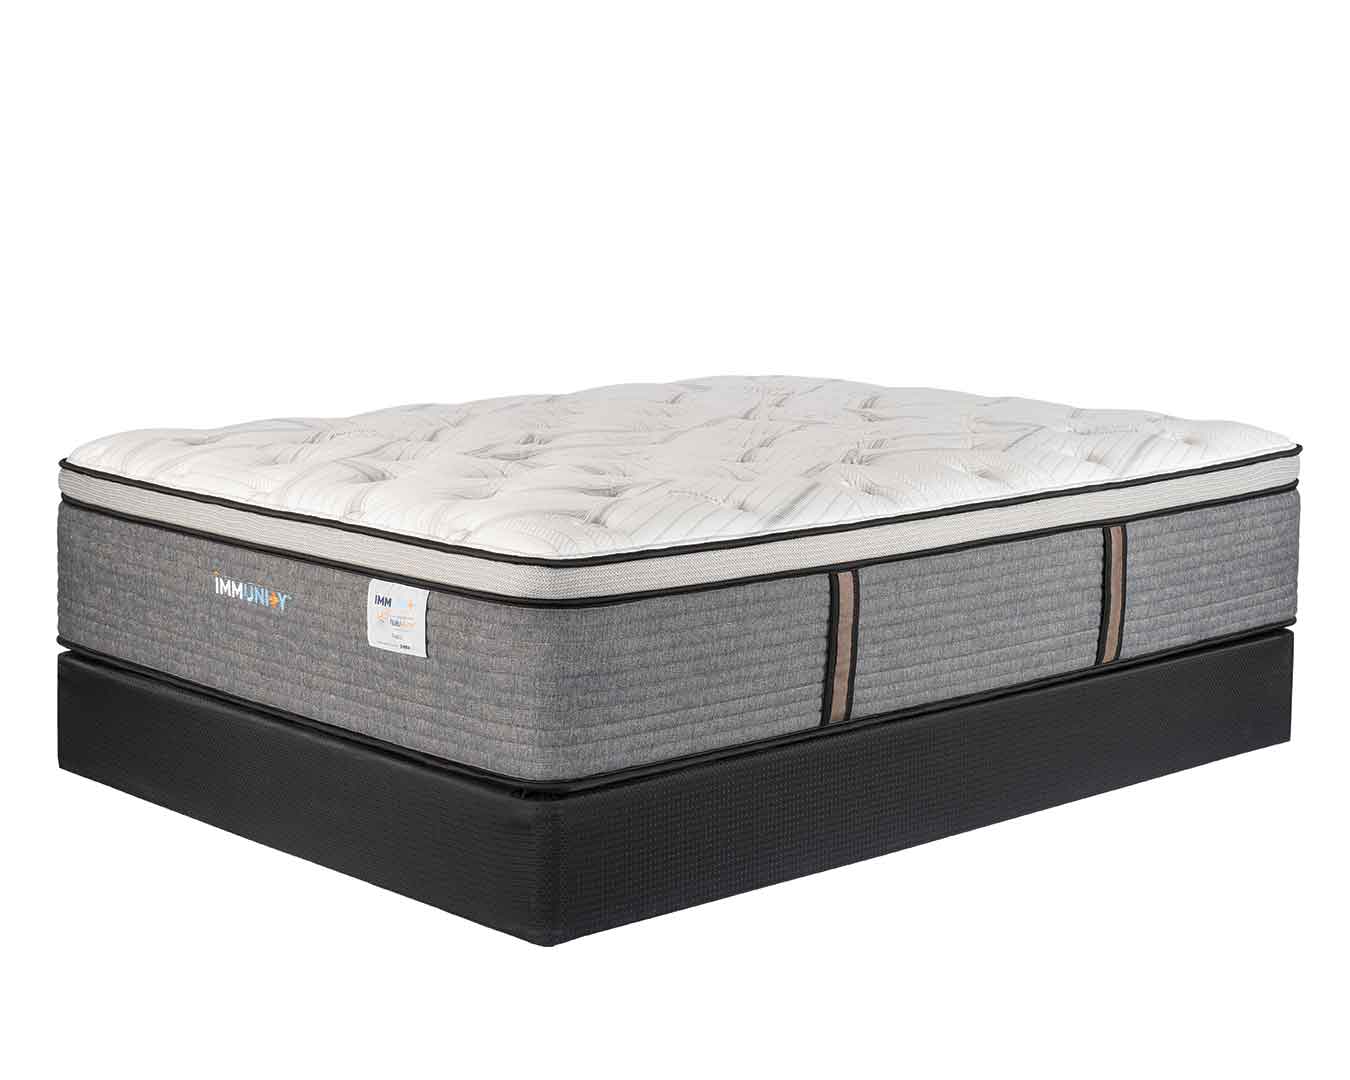 Immunity Sepia copper mattress on agility foundation at an angle with a white background.